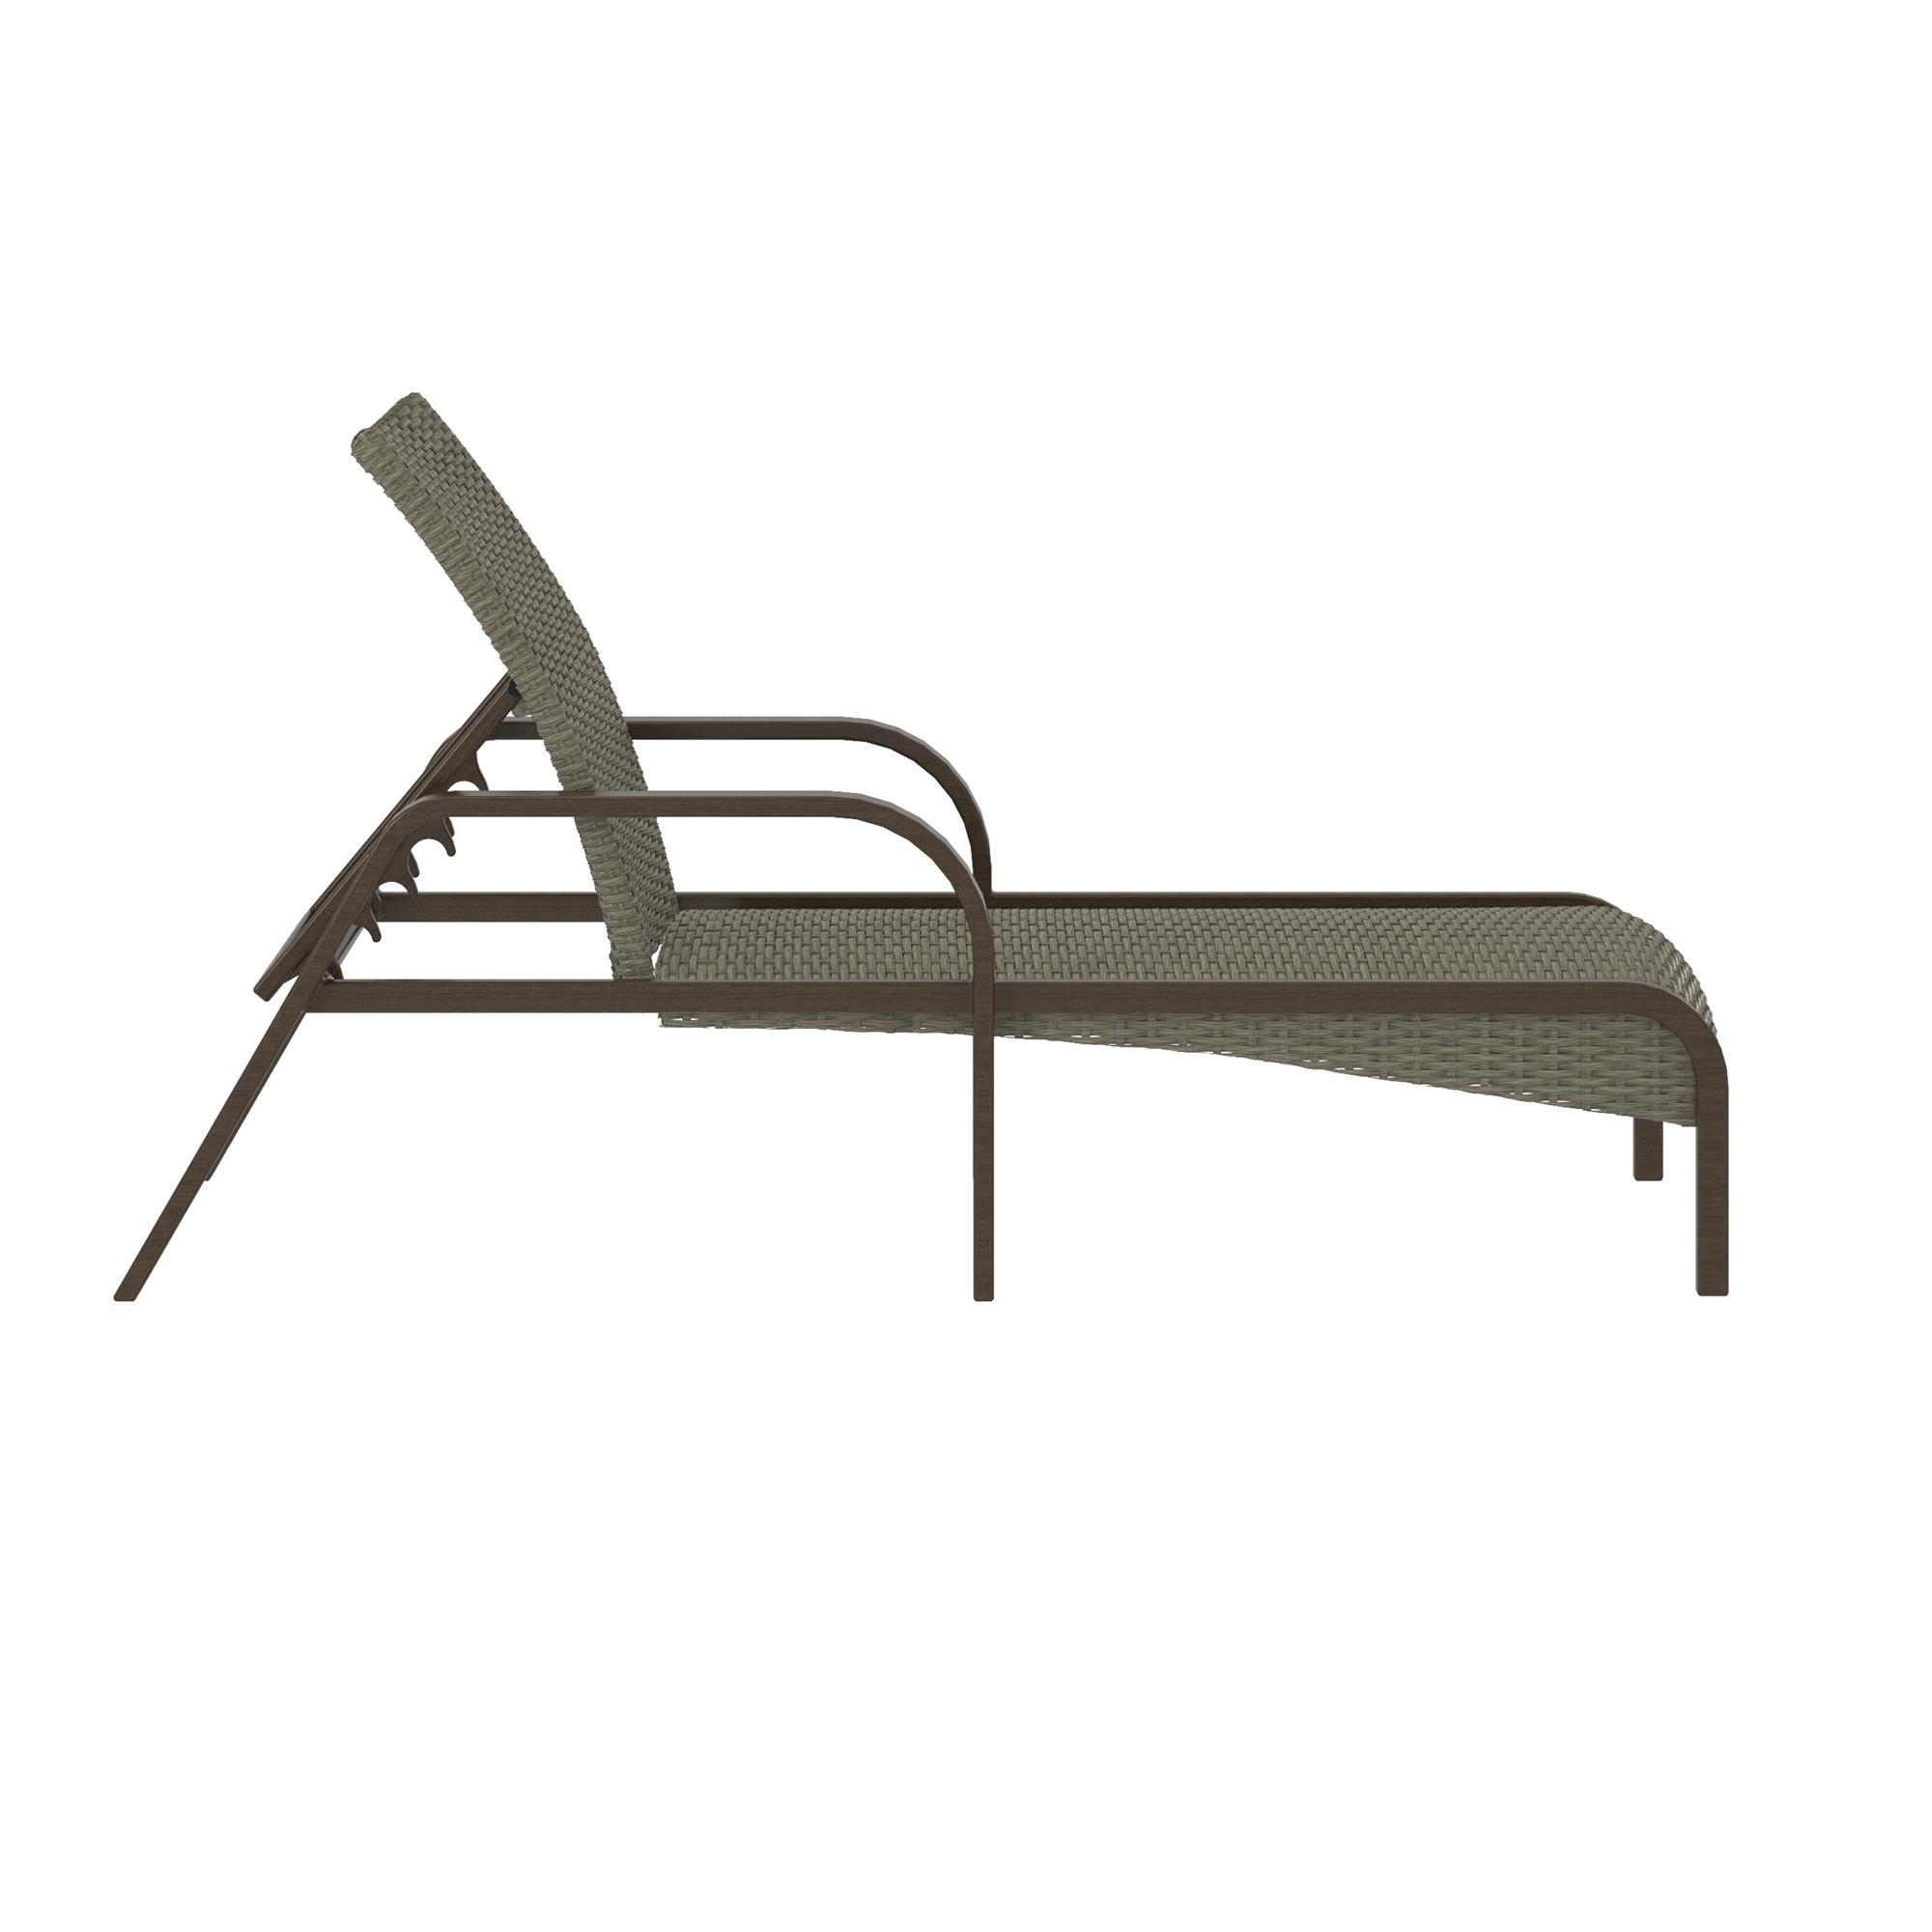 COSCO Outdoor Living, SmartWick, Patio Chaise Lounge, Warm Gray - image 5 of 9